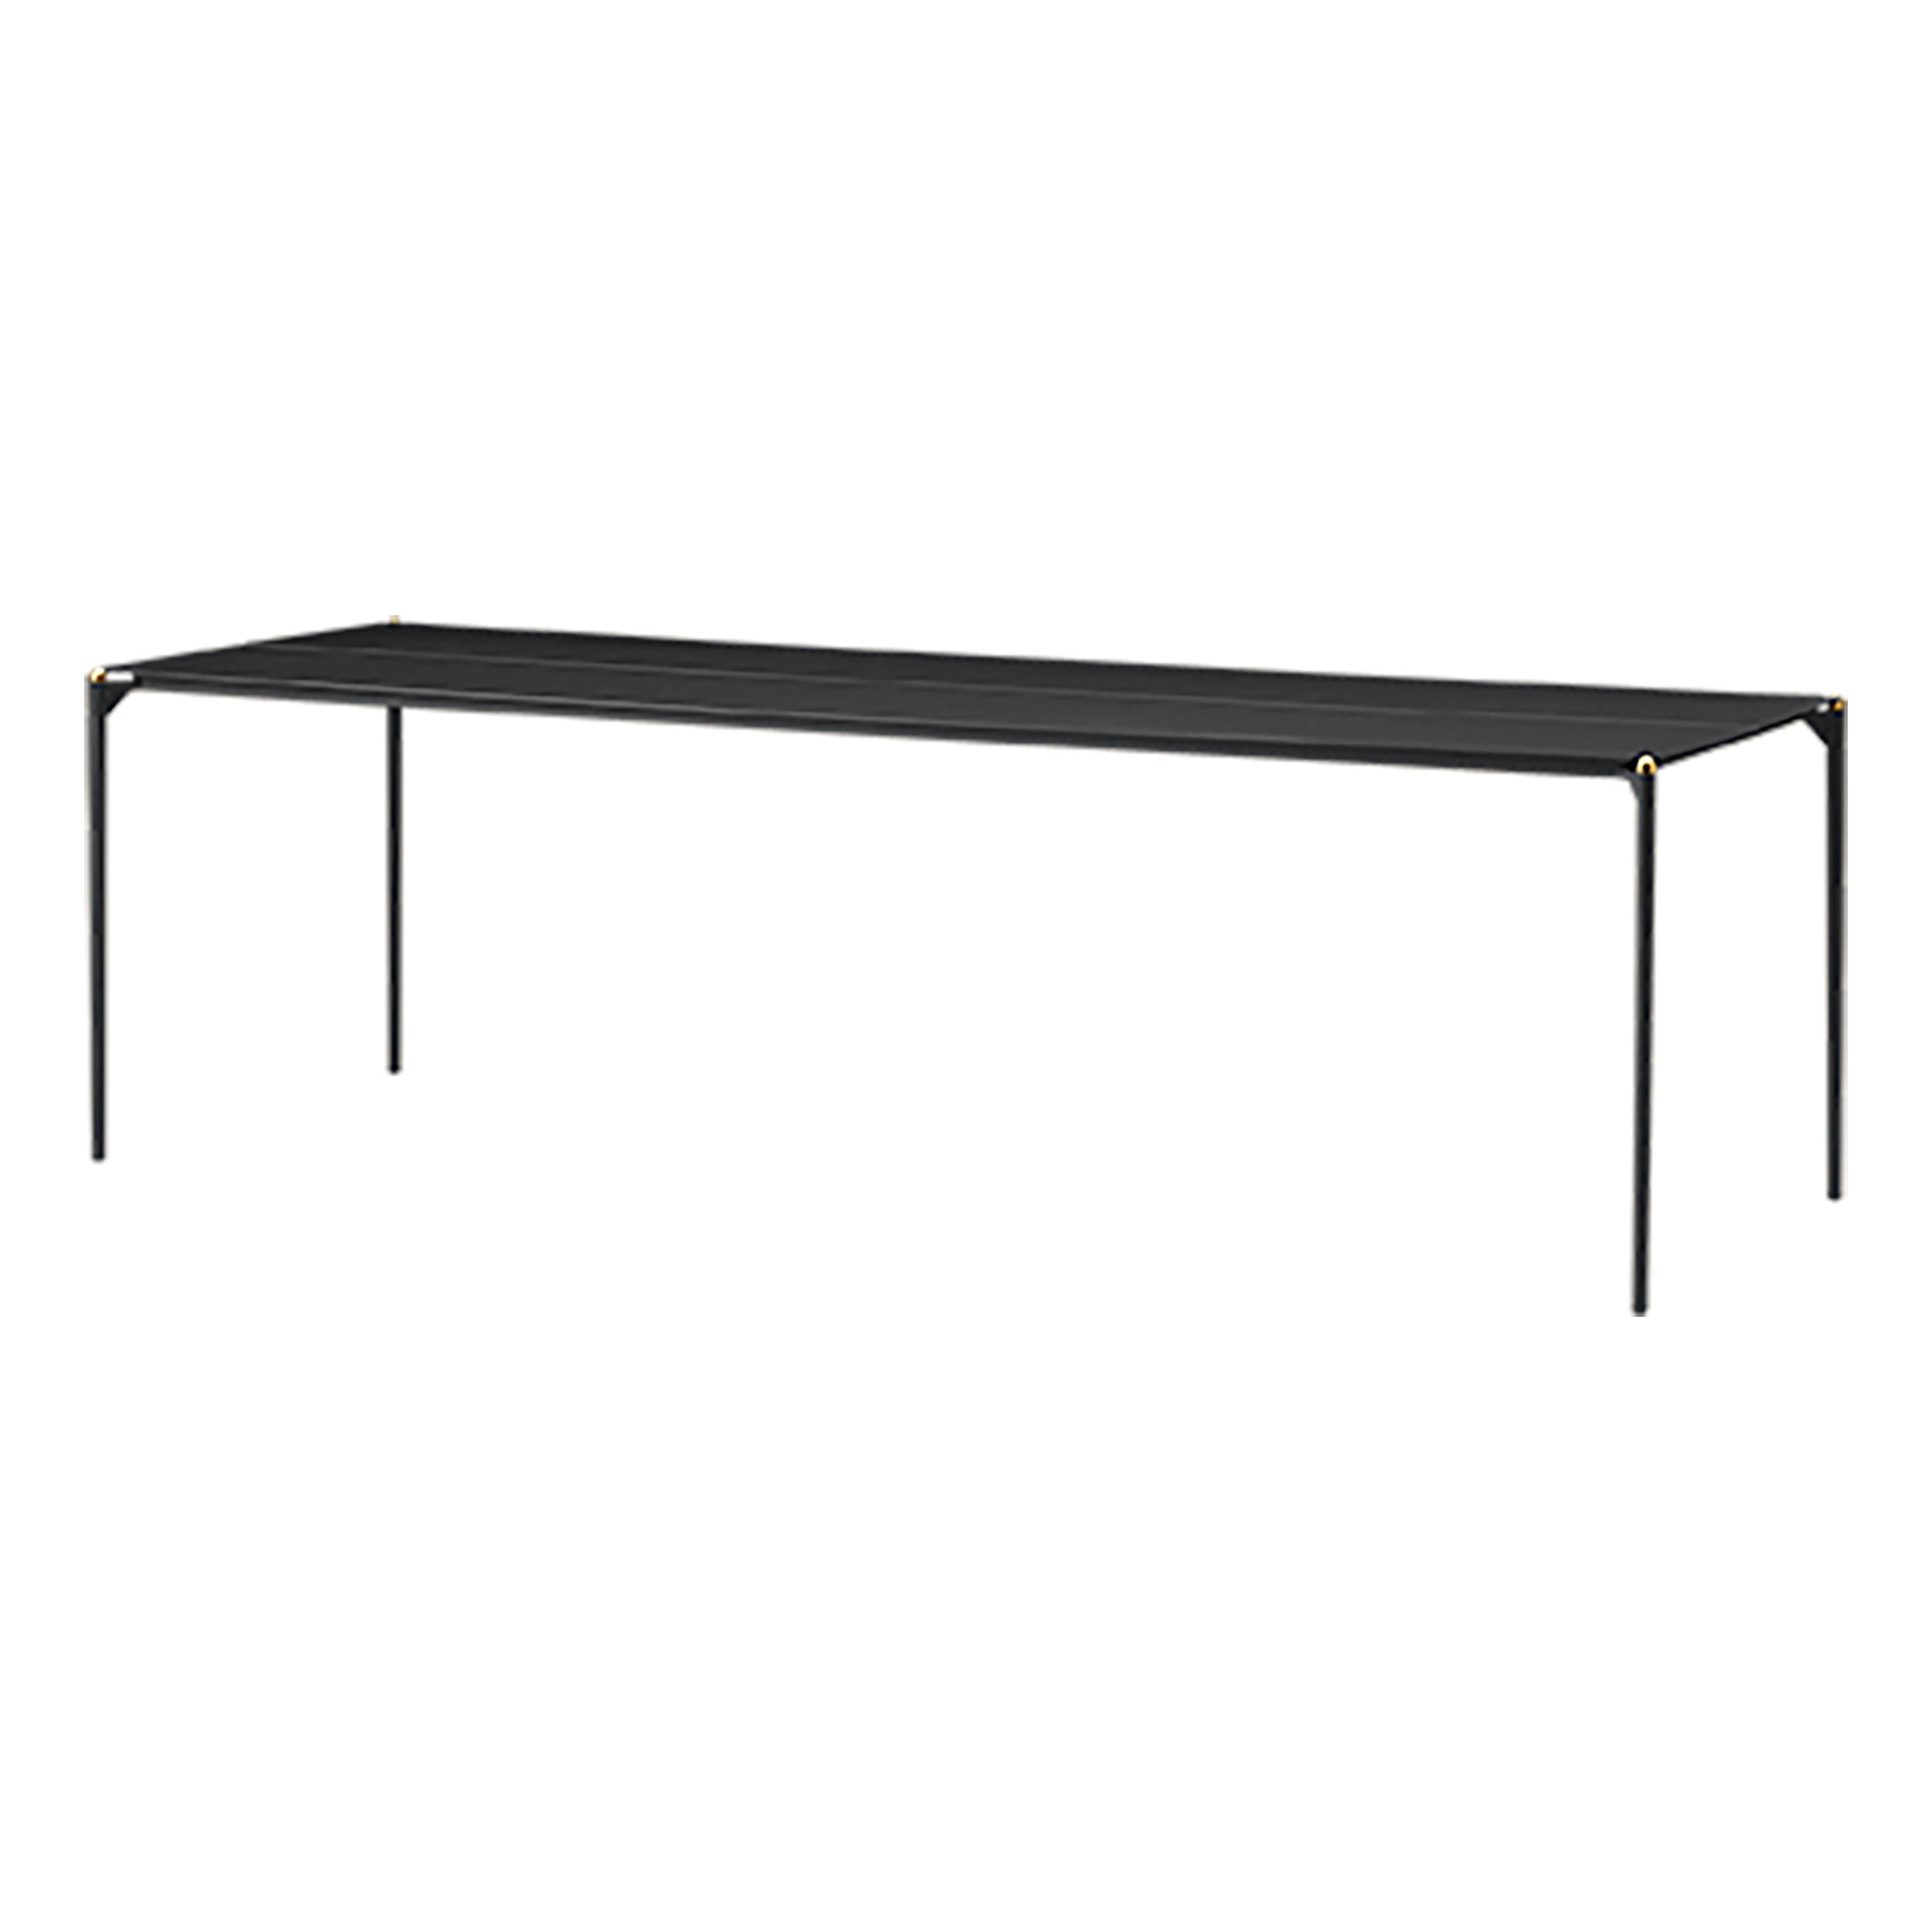 Large black and gold minimalist table
Dimensions: D 240 x W 90 x H 72 cm 
Materials: Steel w. Matte powder coating, aluminum w. Matte powder coating & stainless steel w. Gold titanium plating.
Available in colors: Taupe, bordeaux, forest, ginger